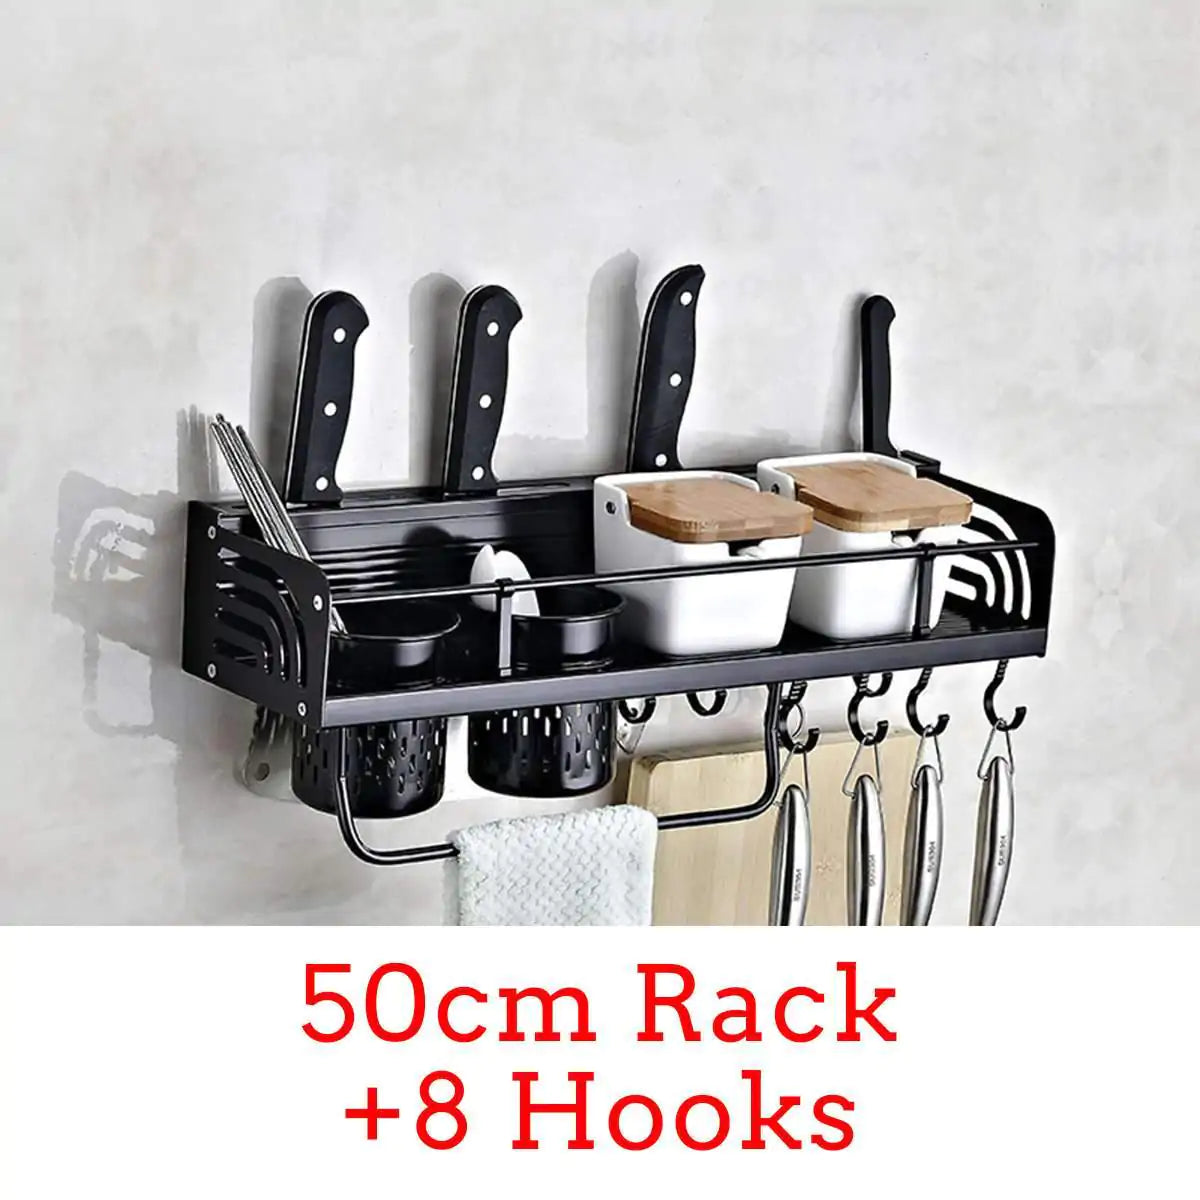 "Organize your kitchen with our versatile rack solution."